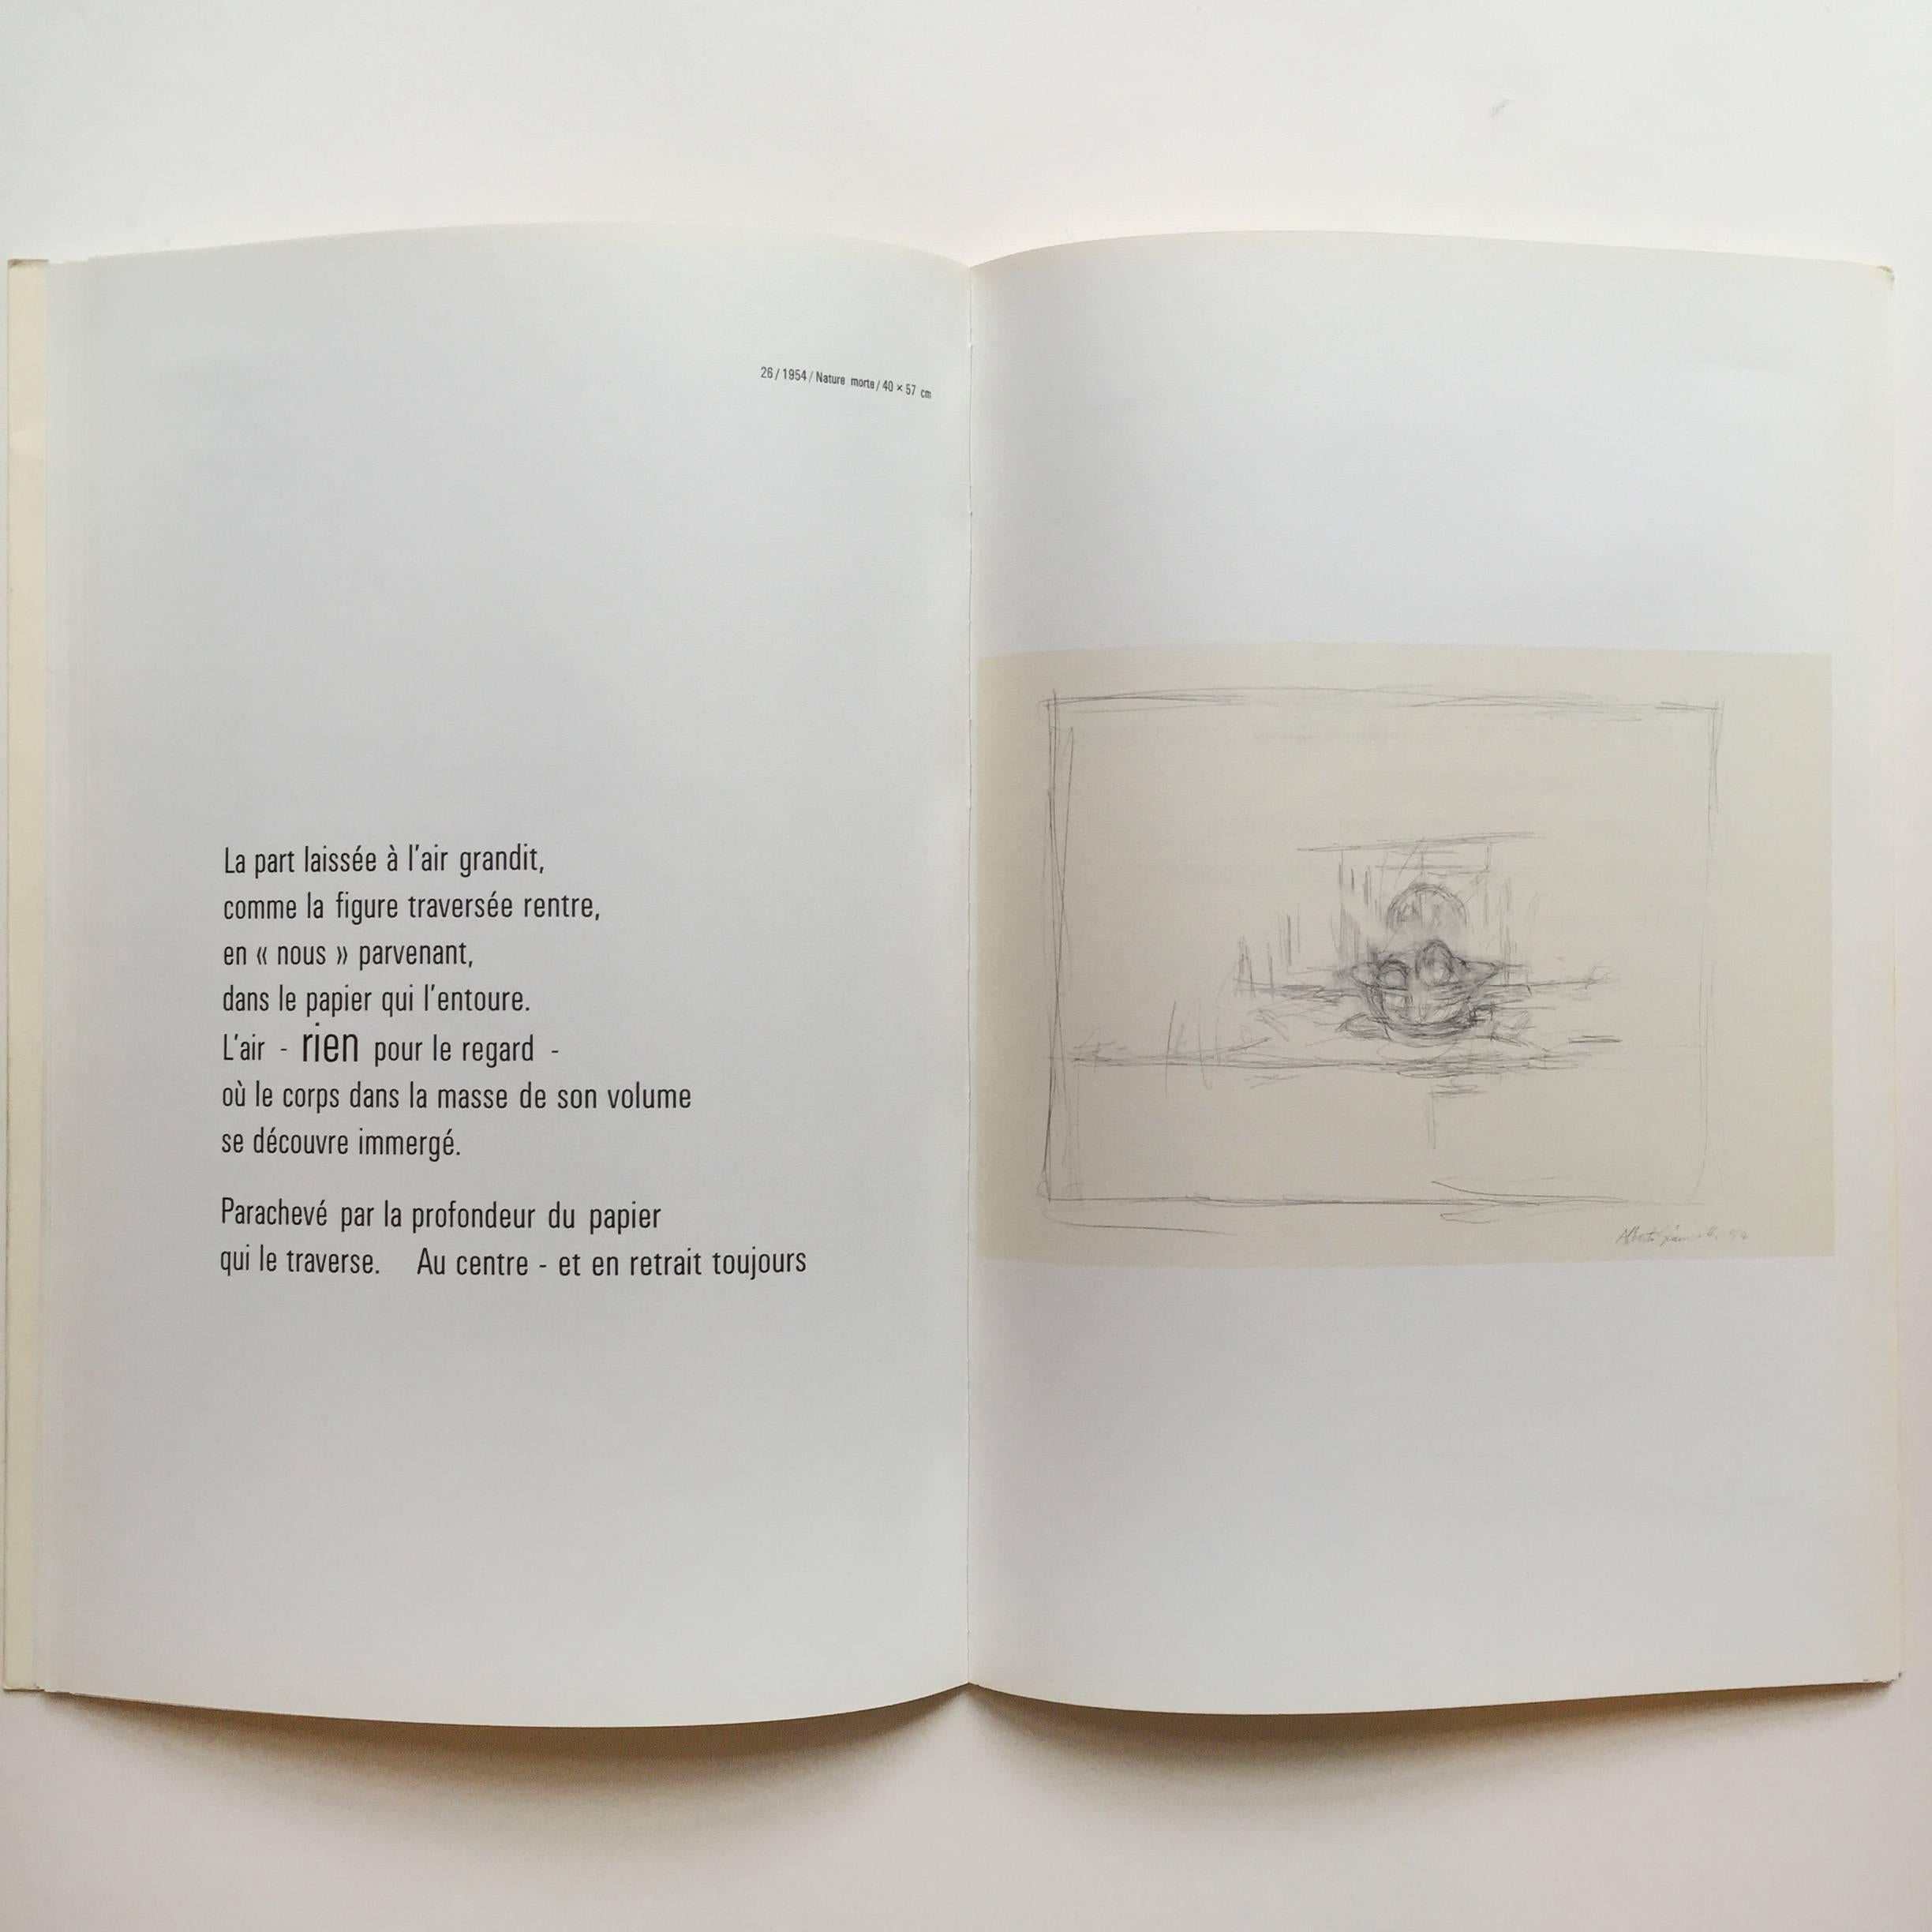 First edition, published by Galerie Claude Bernard, 1968.

 This book was published in conjunction of the exhibition of Giacometti drawings at Galerie Claude Bernard. Known by many for his slender bronze sculptures, these drawings demonstrate